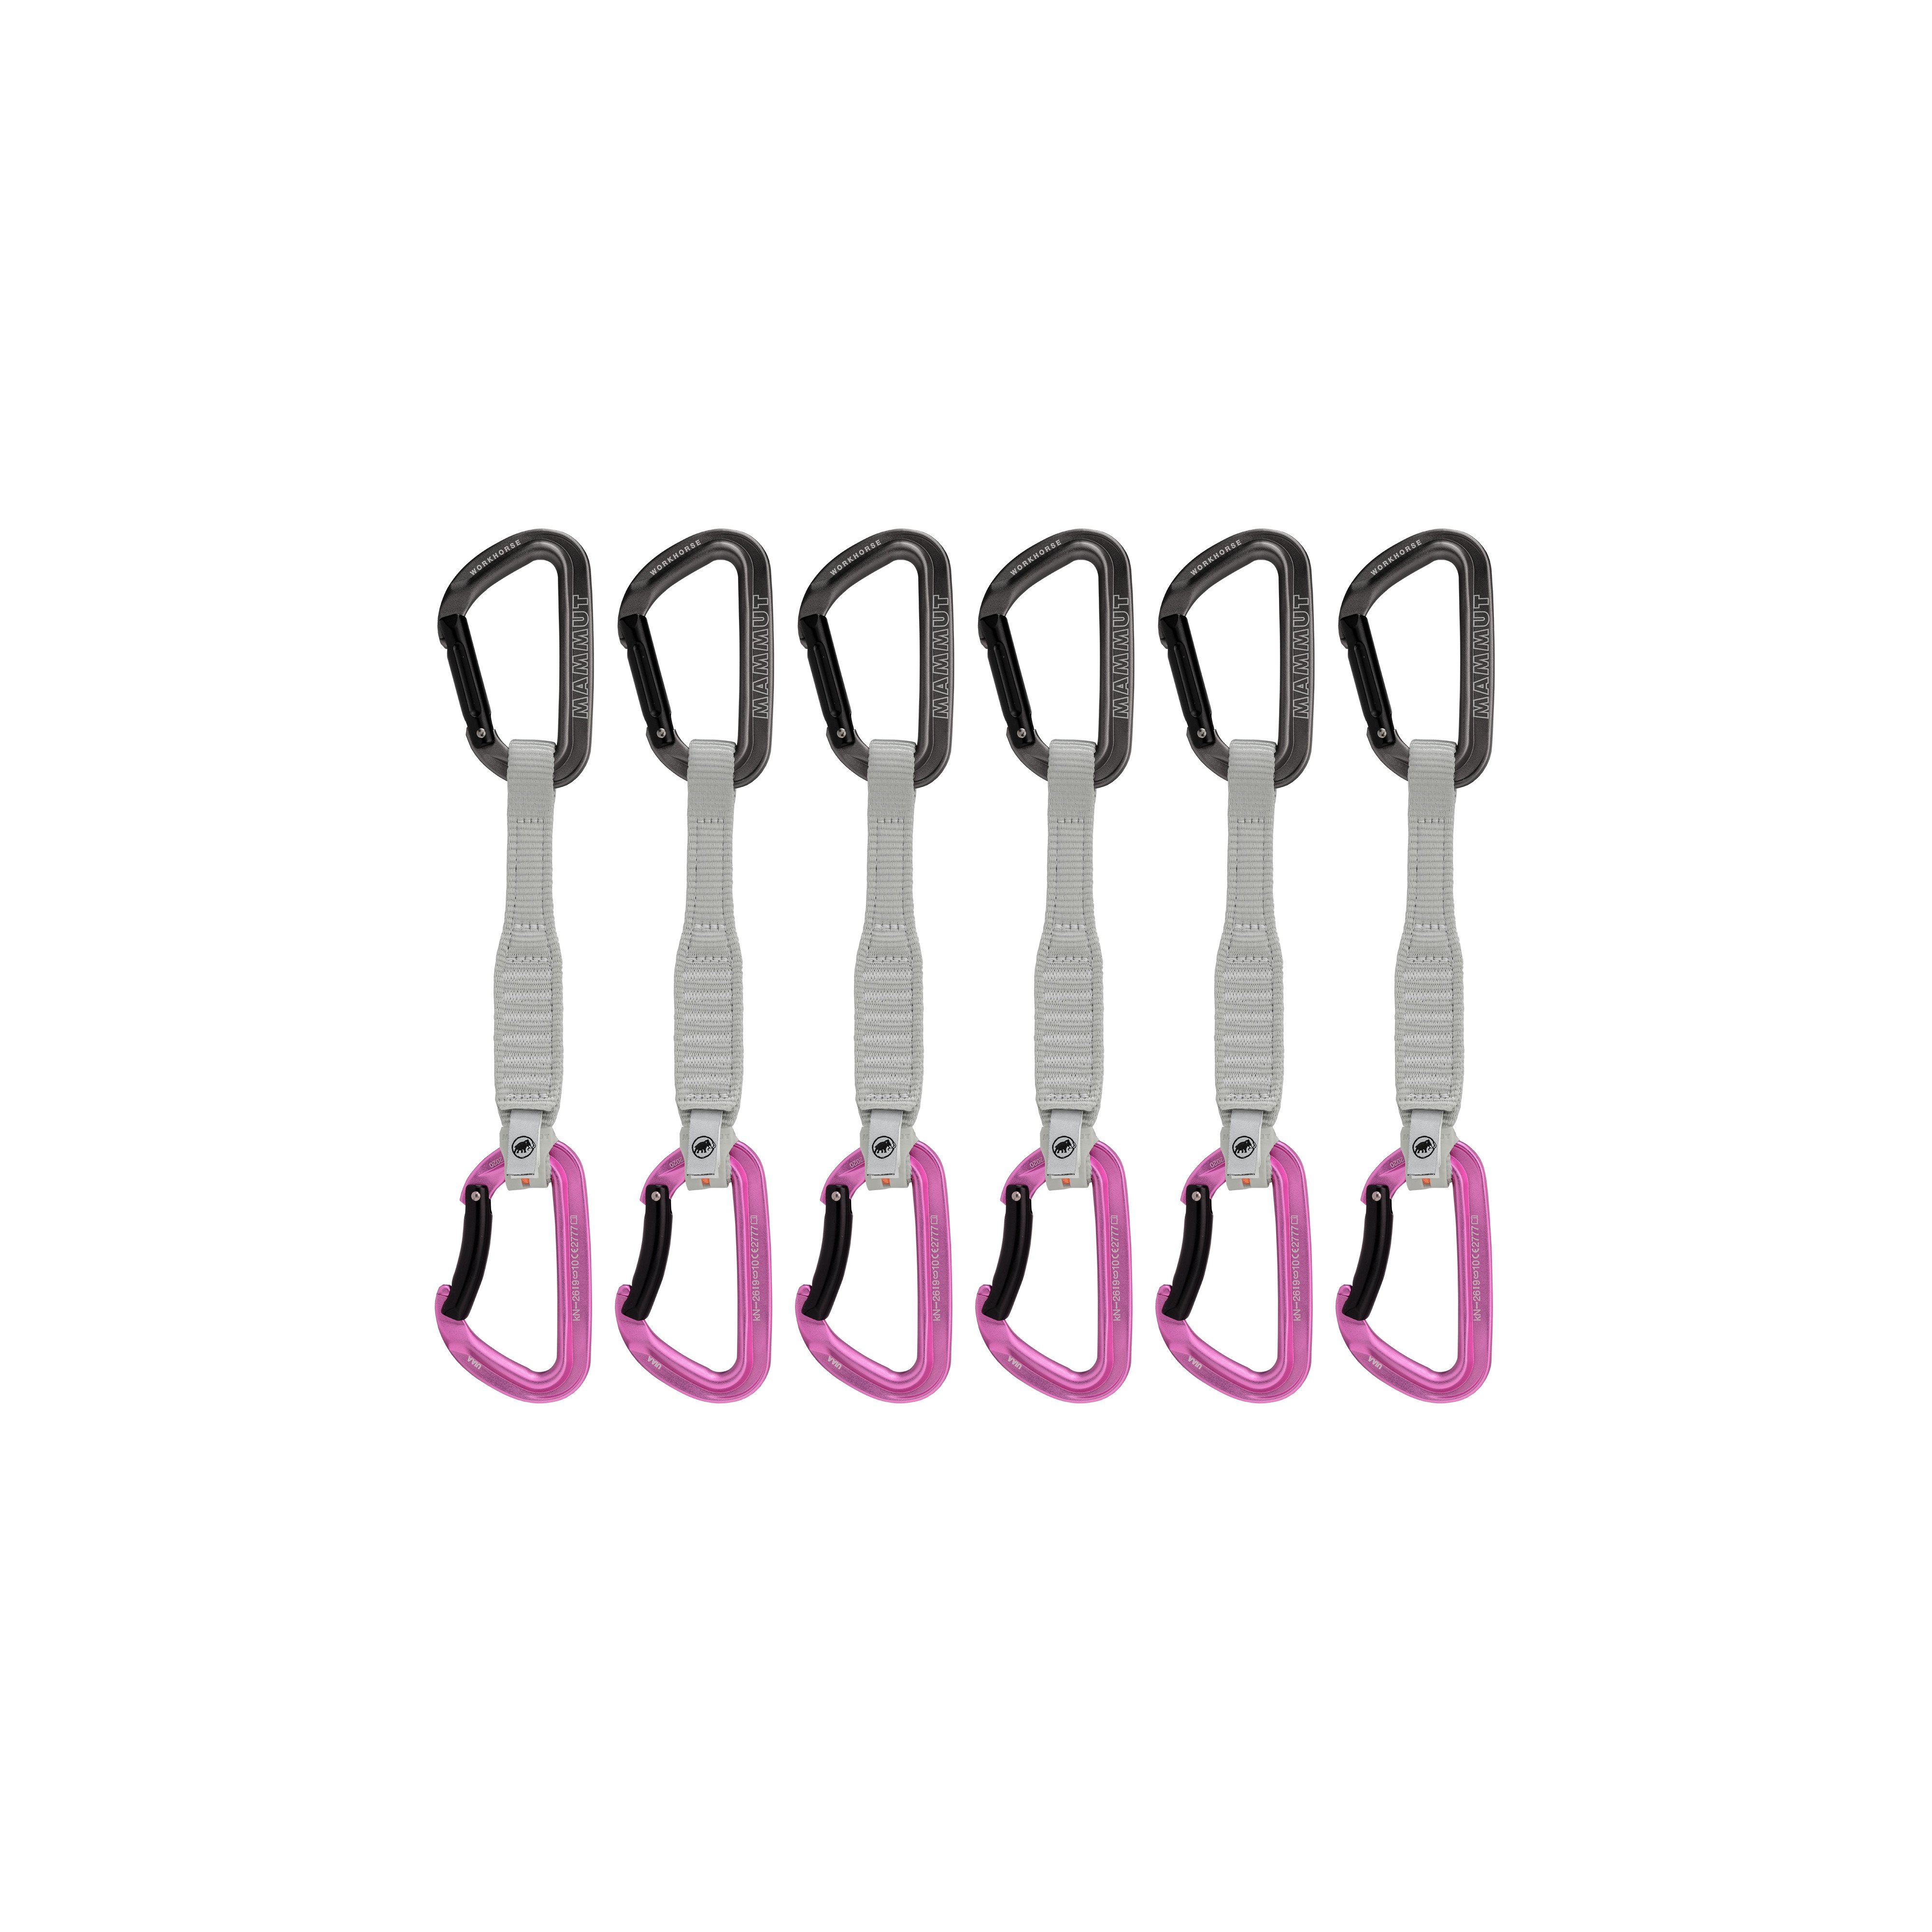 Workhorse Keylock 17 cm 6-Pack Quickdraws - 17 cm product image